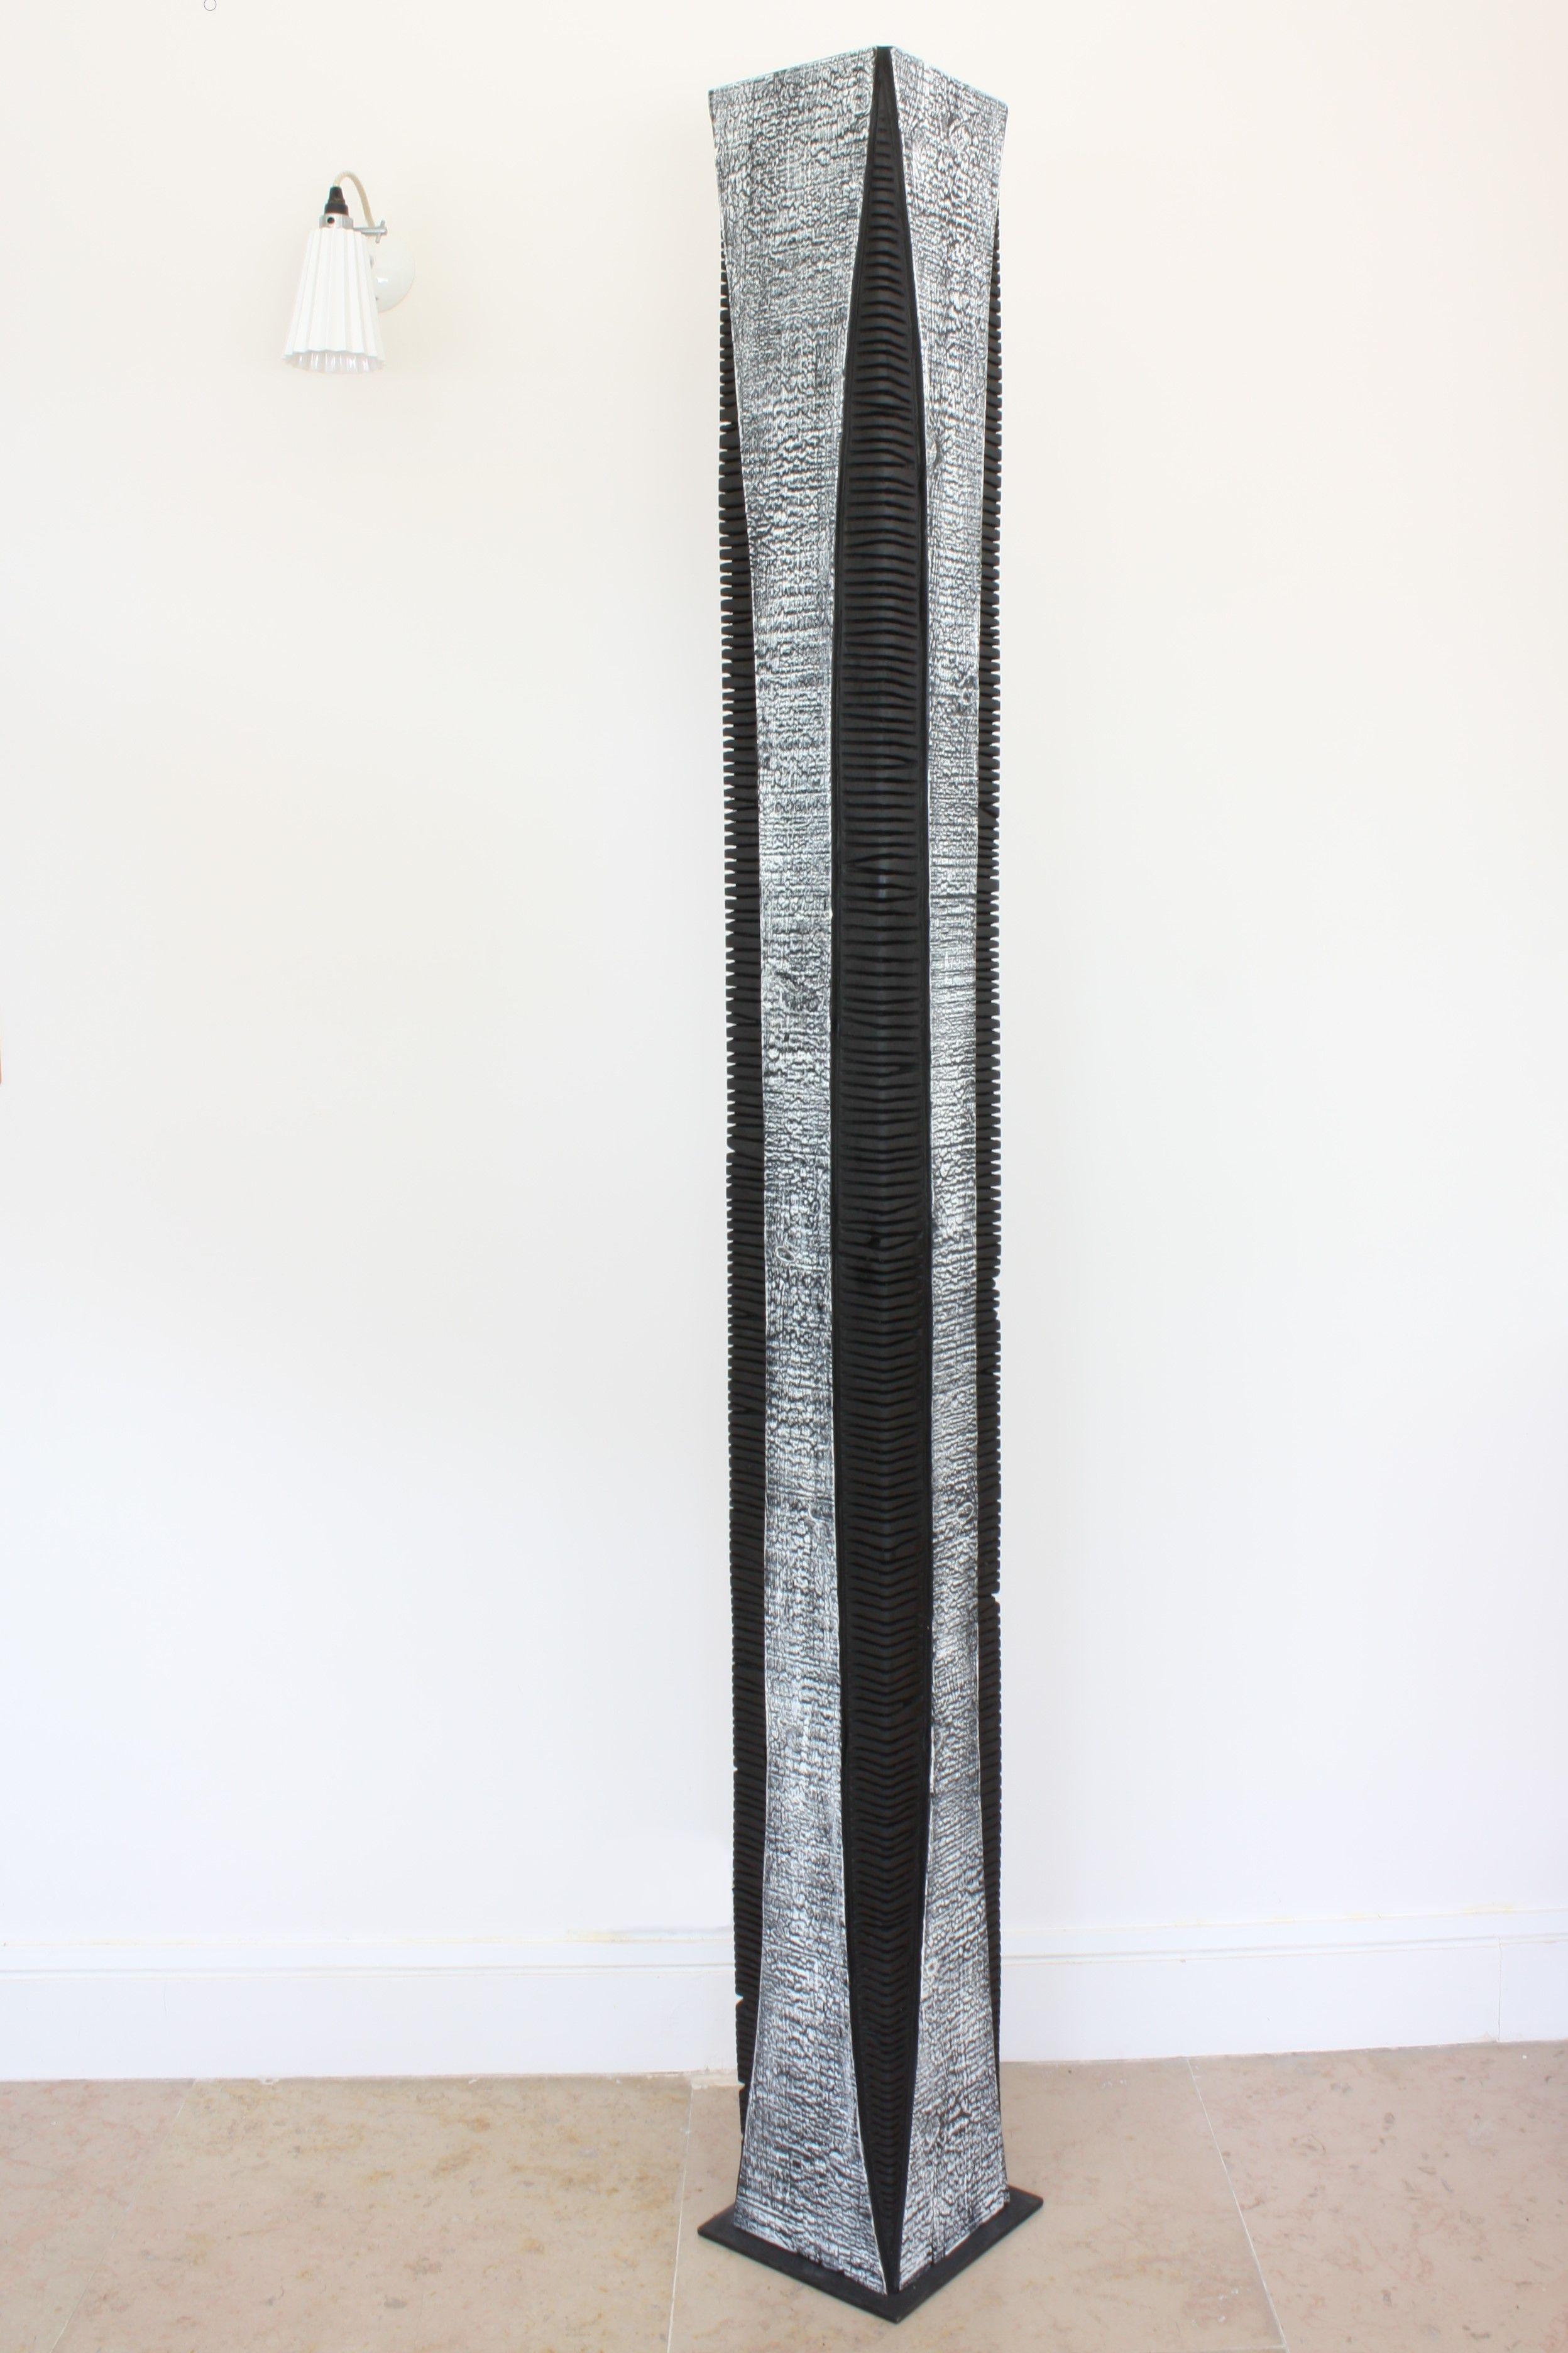 Beautifully textured contemporary wooden skyscraper sculpture on a metal Stand. Artist Natacha Heitz finds the primary material for her extraordinary black and white wood sculpture in the Arolla pine. A stunning combination of surfaces and forms, it